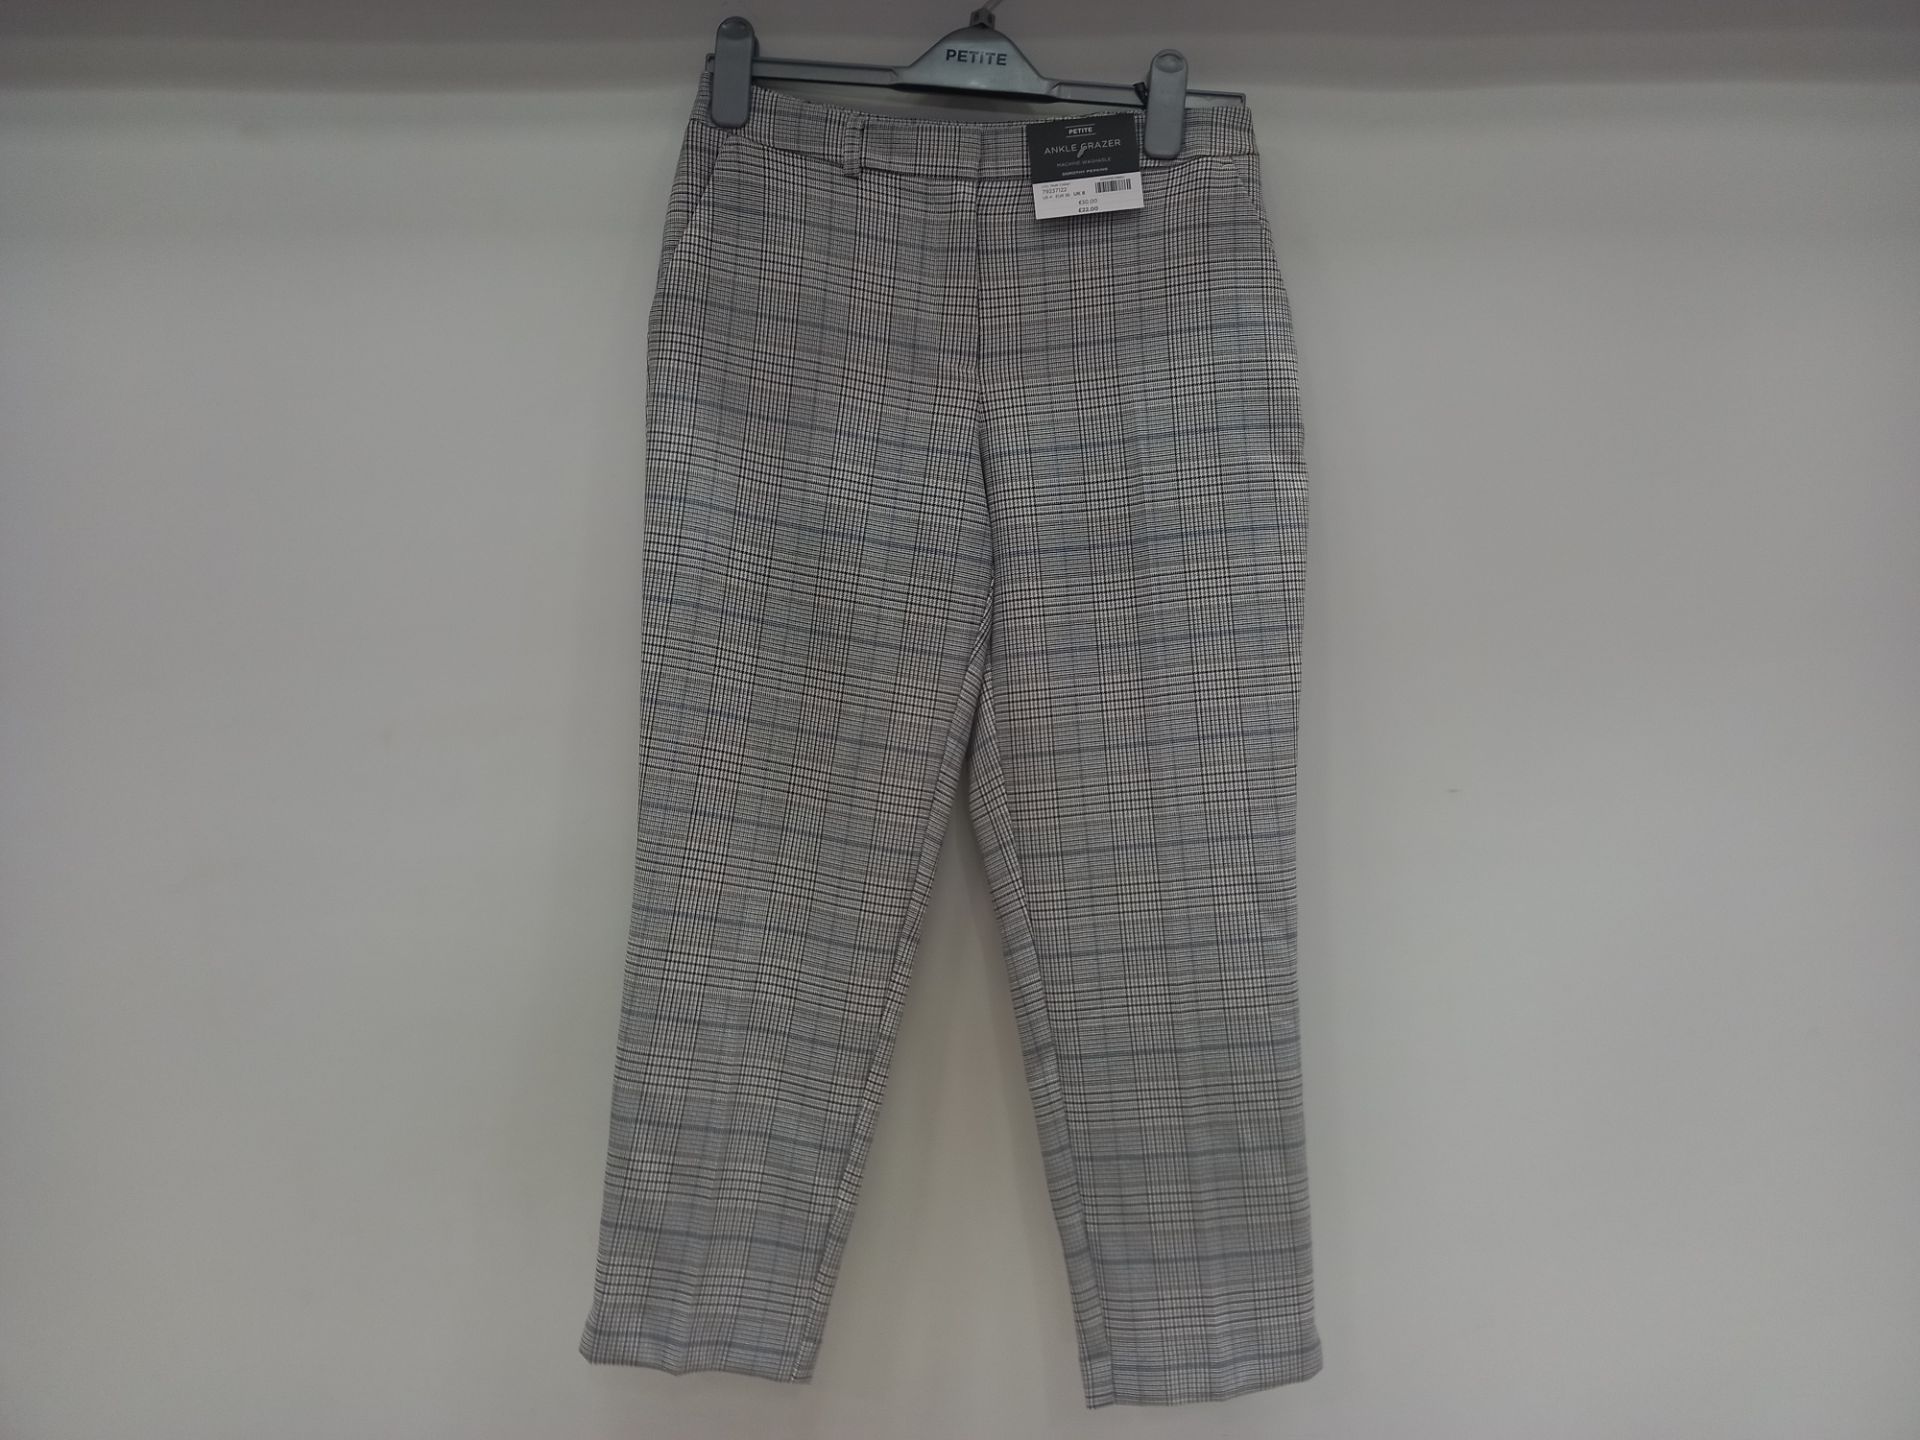 12 X BRAND NEW DOROTHY PERKINS PETITE CHEQUERED ANKLE GRAZERS UK SIZE 8, 10 AND 16 RRP £22.00 (TOTAL